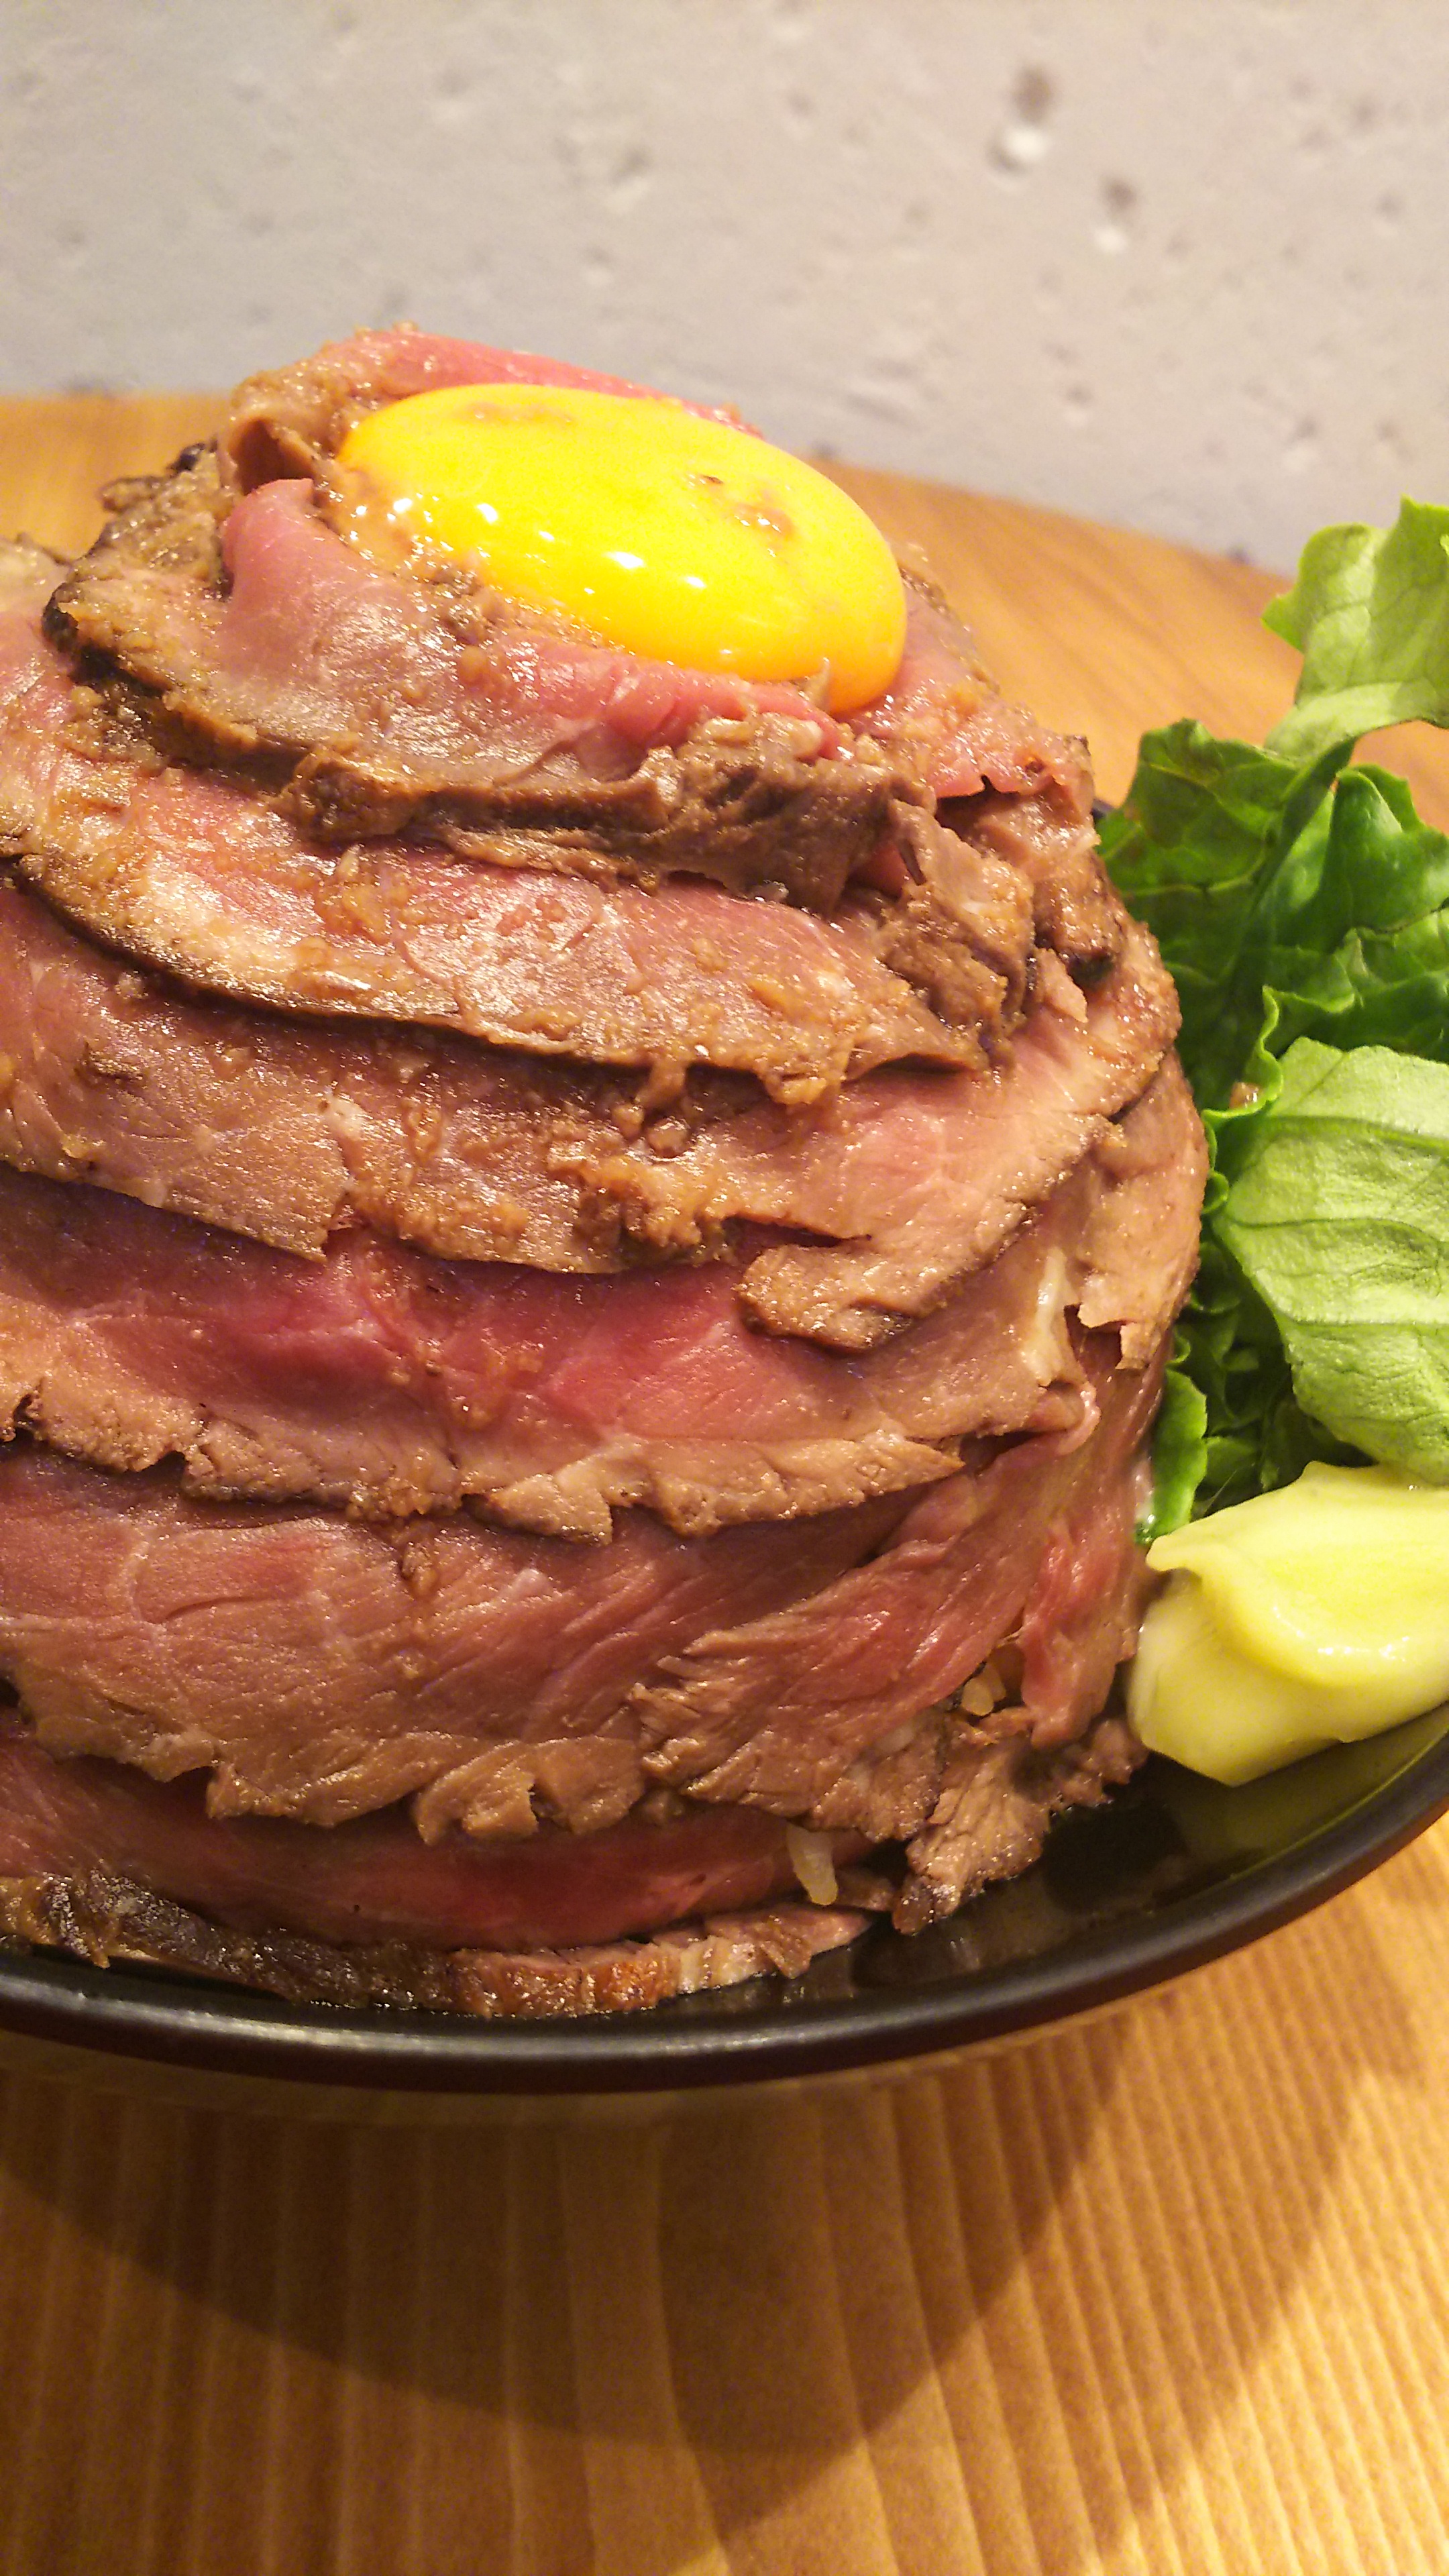 THE肉丼の店>